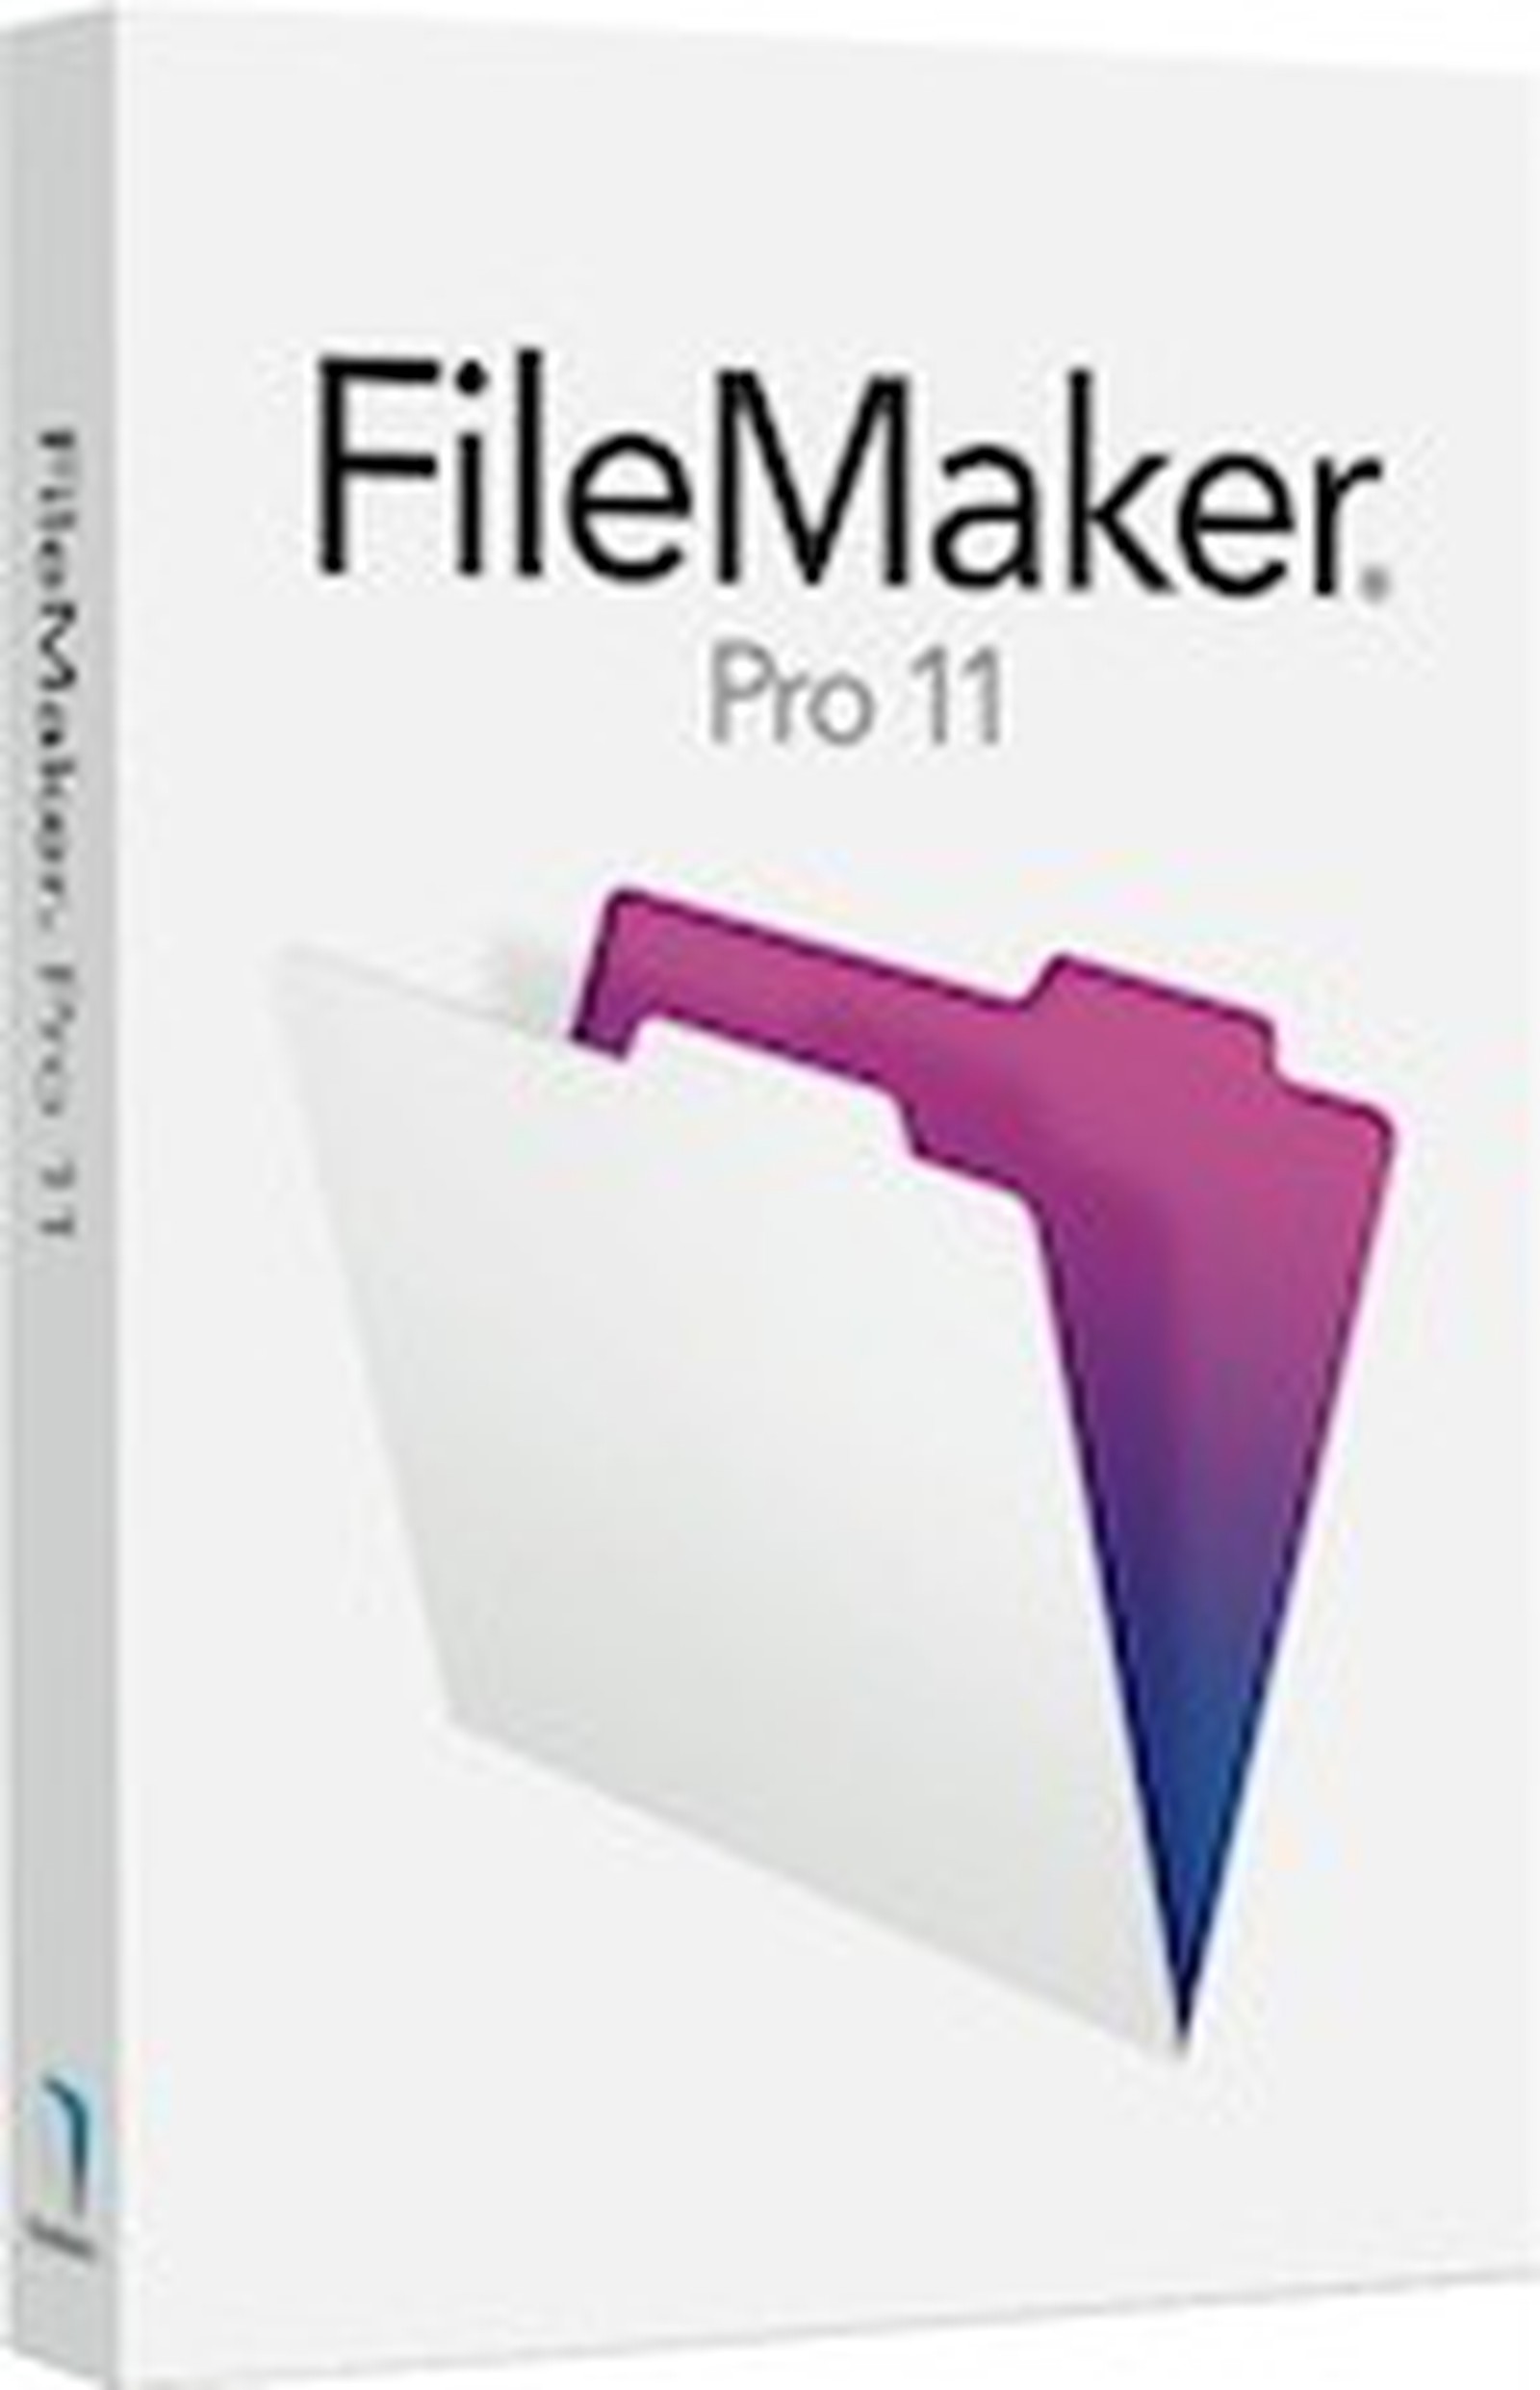 filemaker pro 11 features